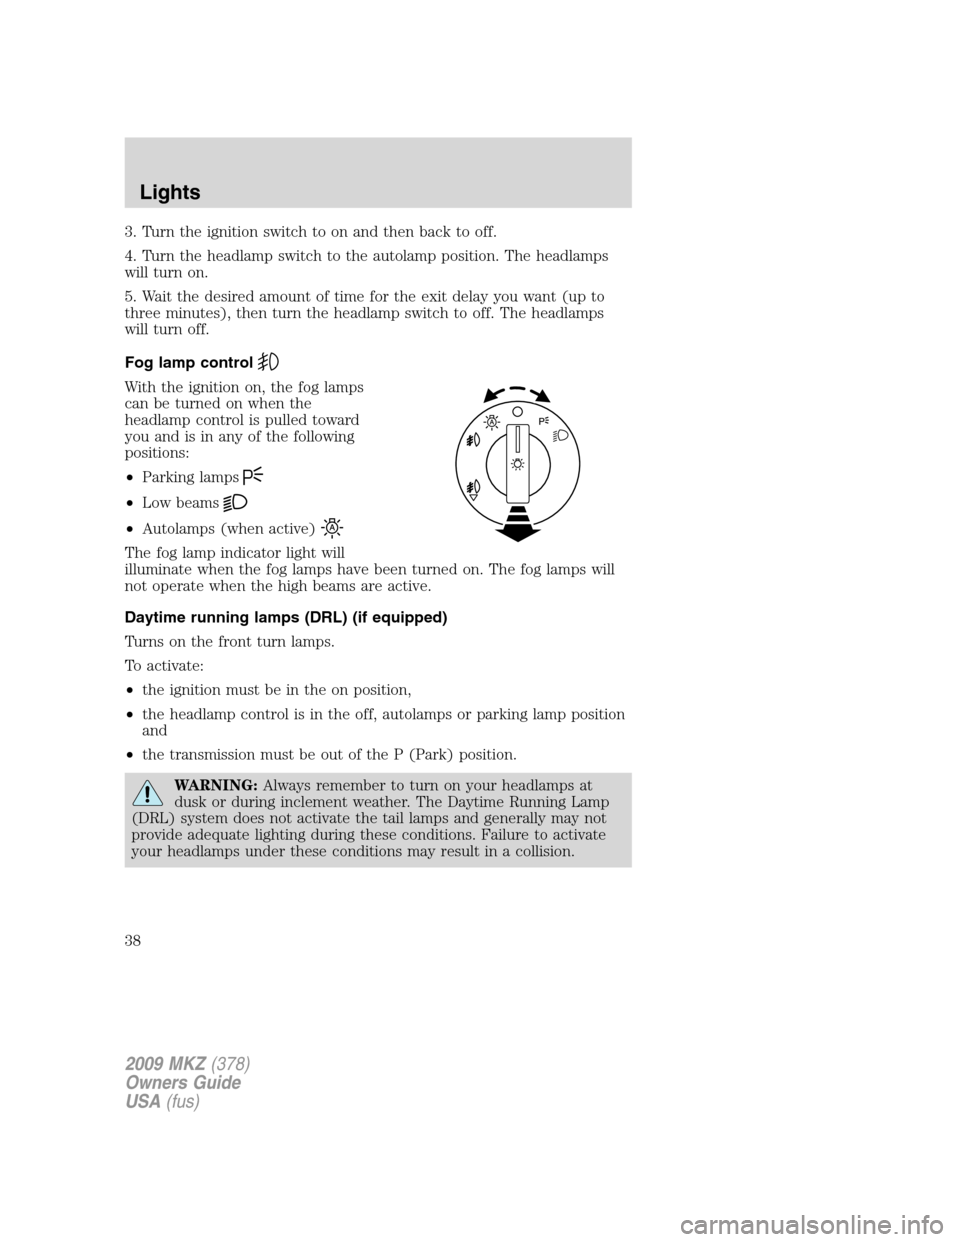 LINCOLN MKZ 2009  Owners Manual 3. Turn the ignition switch to on and then back to off.
4. Turn the headlamp switch to the autolamp position. The headlamps
will turn on.
5. Wait the desired amount of time for the exit delay you want